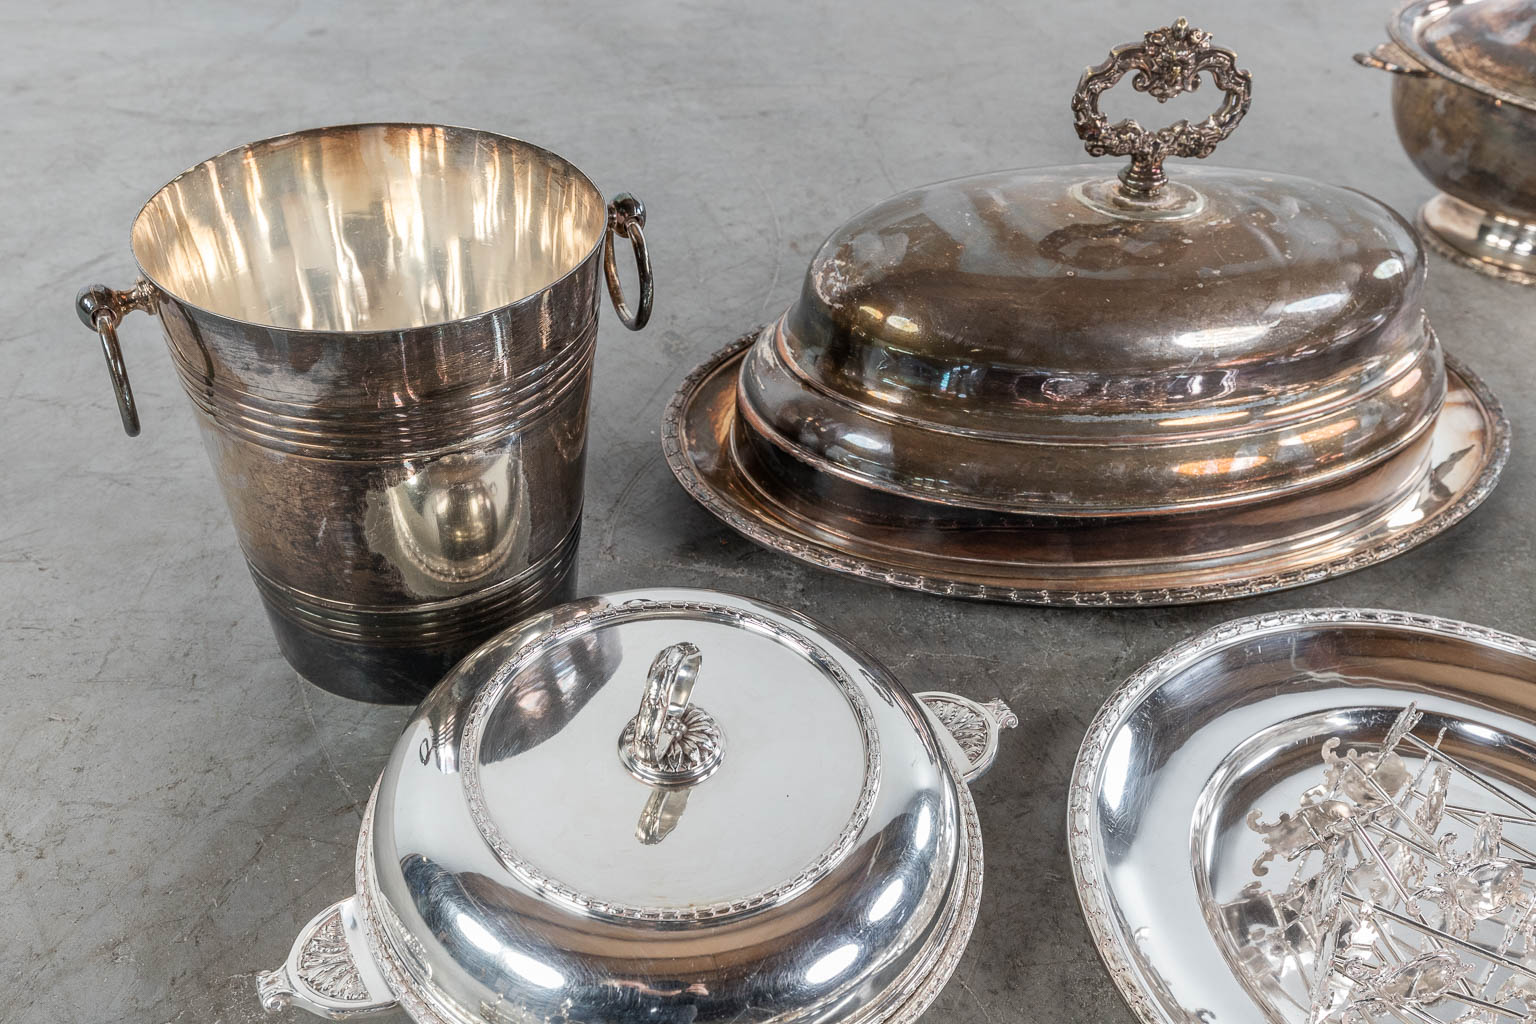 A large collection of table accessories and serving ware, silver-plated metal. (L: 32 x W: 48 cm)